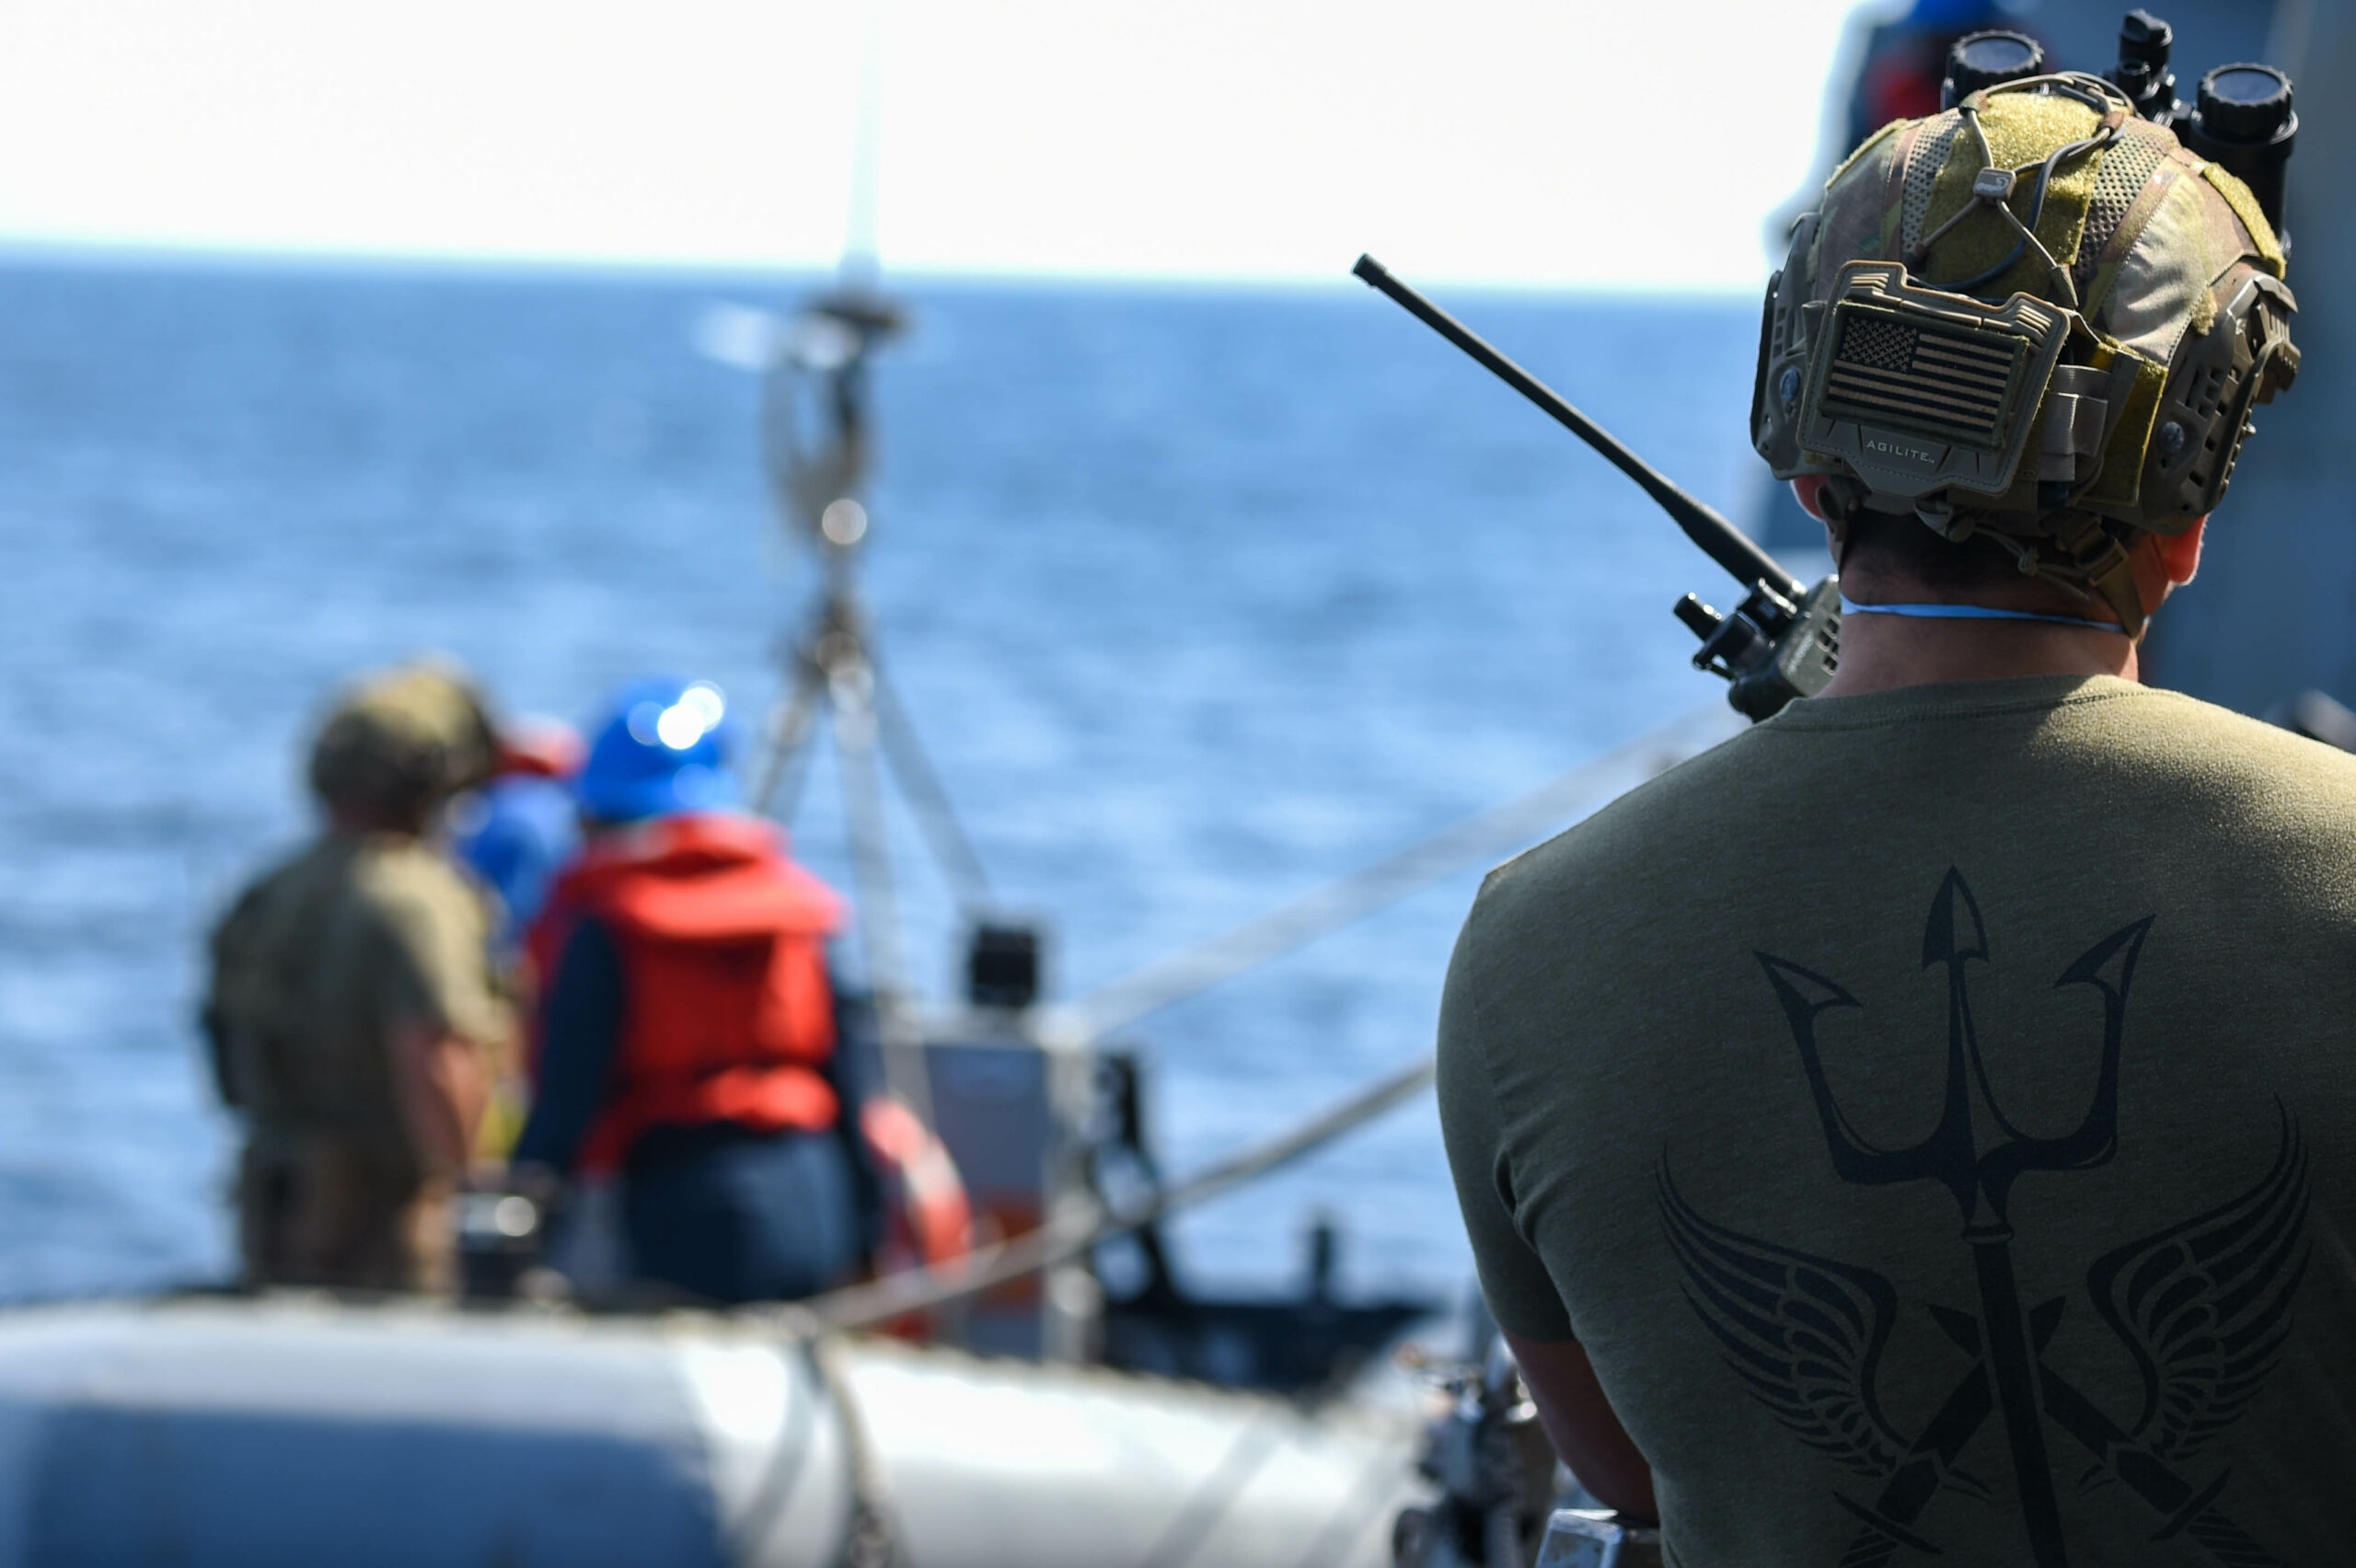 210830-N-UP745-1104 ATLANTIC OCEAN (Aug. 30, 2021) U.S. Coast Guardsman uses a two-way radio to direct a rigid-hulled-inflatable boat during a small-boat operation aboard the USS Forrest Sherman (DDG 98). Forrest Sherman is conducting Initial Ship Aviation Team Training with HSM-60 Detachment 2 in the Virginia Capes. (U.S. Navy Photo by Mass Communication Specialist Seaman Theoplis Stewart II/Released)